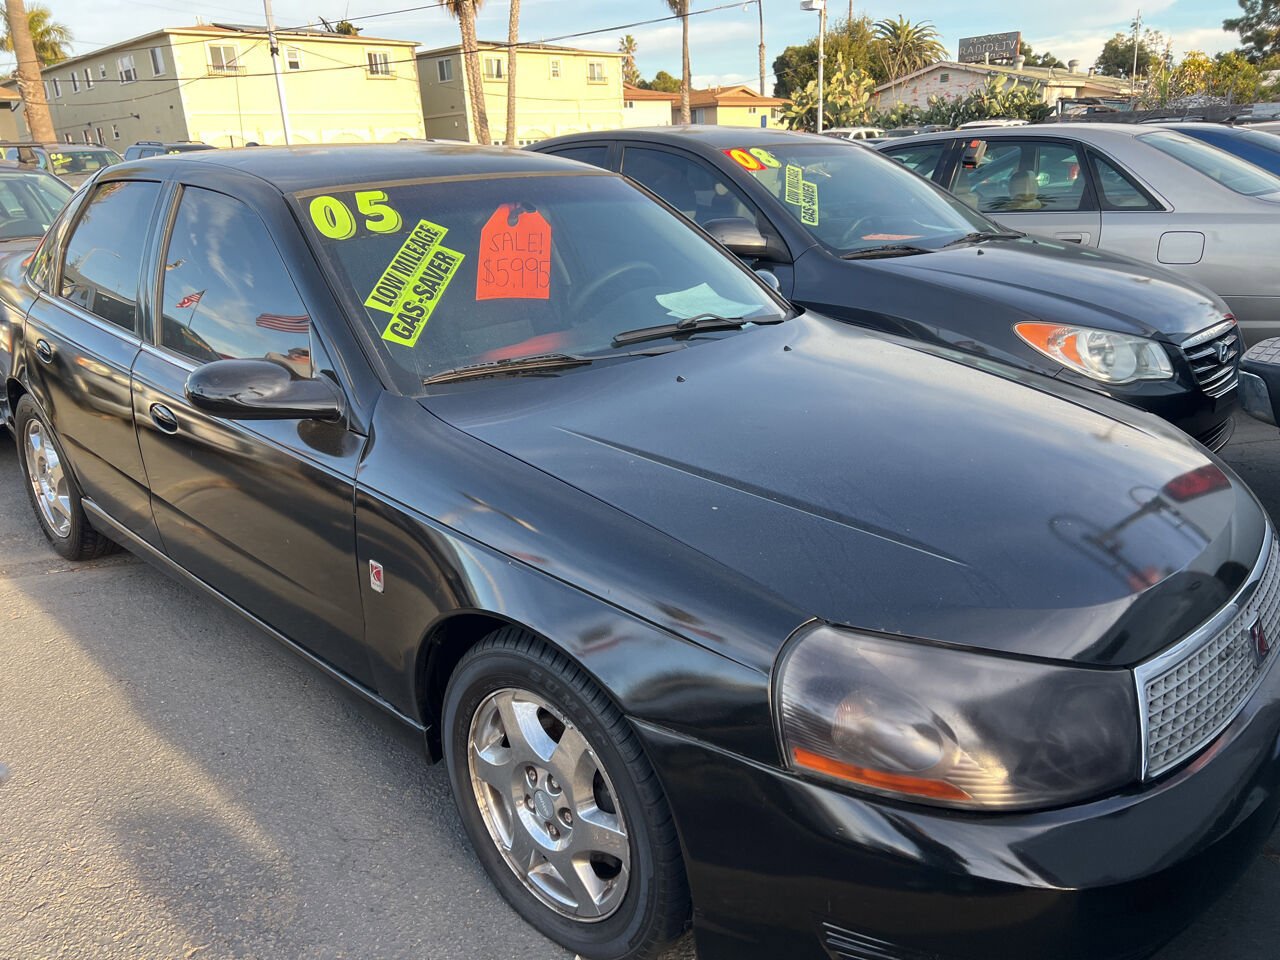 Used 2005 Saturn L-Series for Sale Right Now - Autotrader